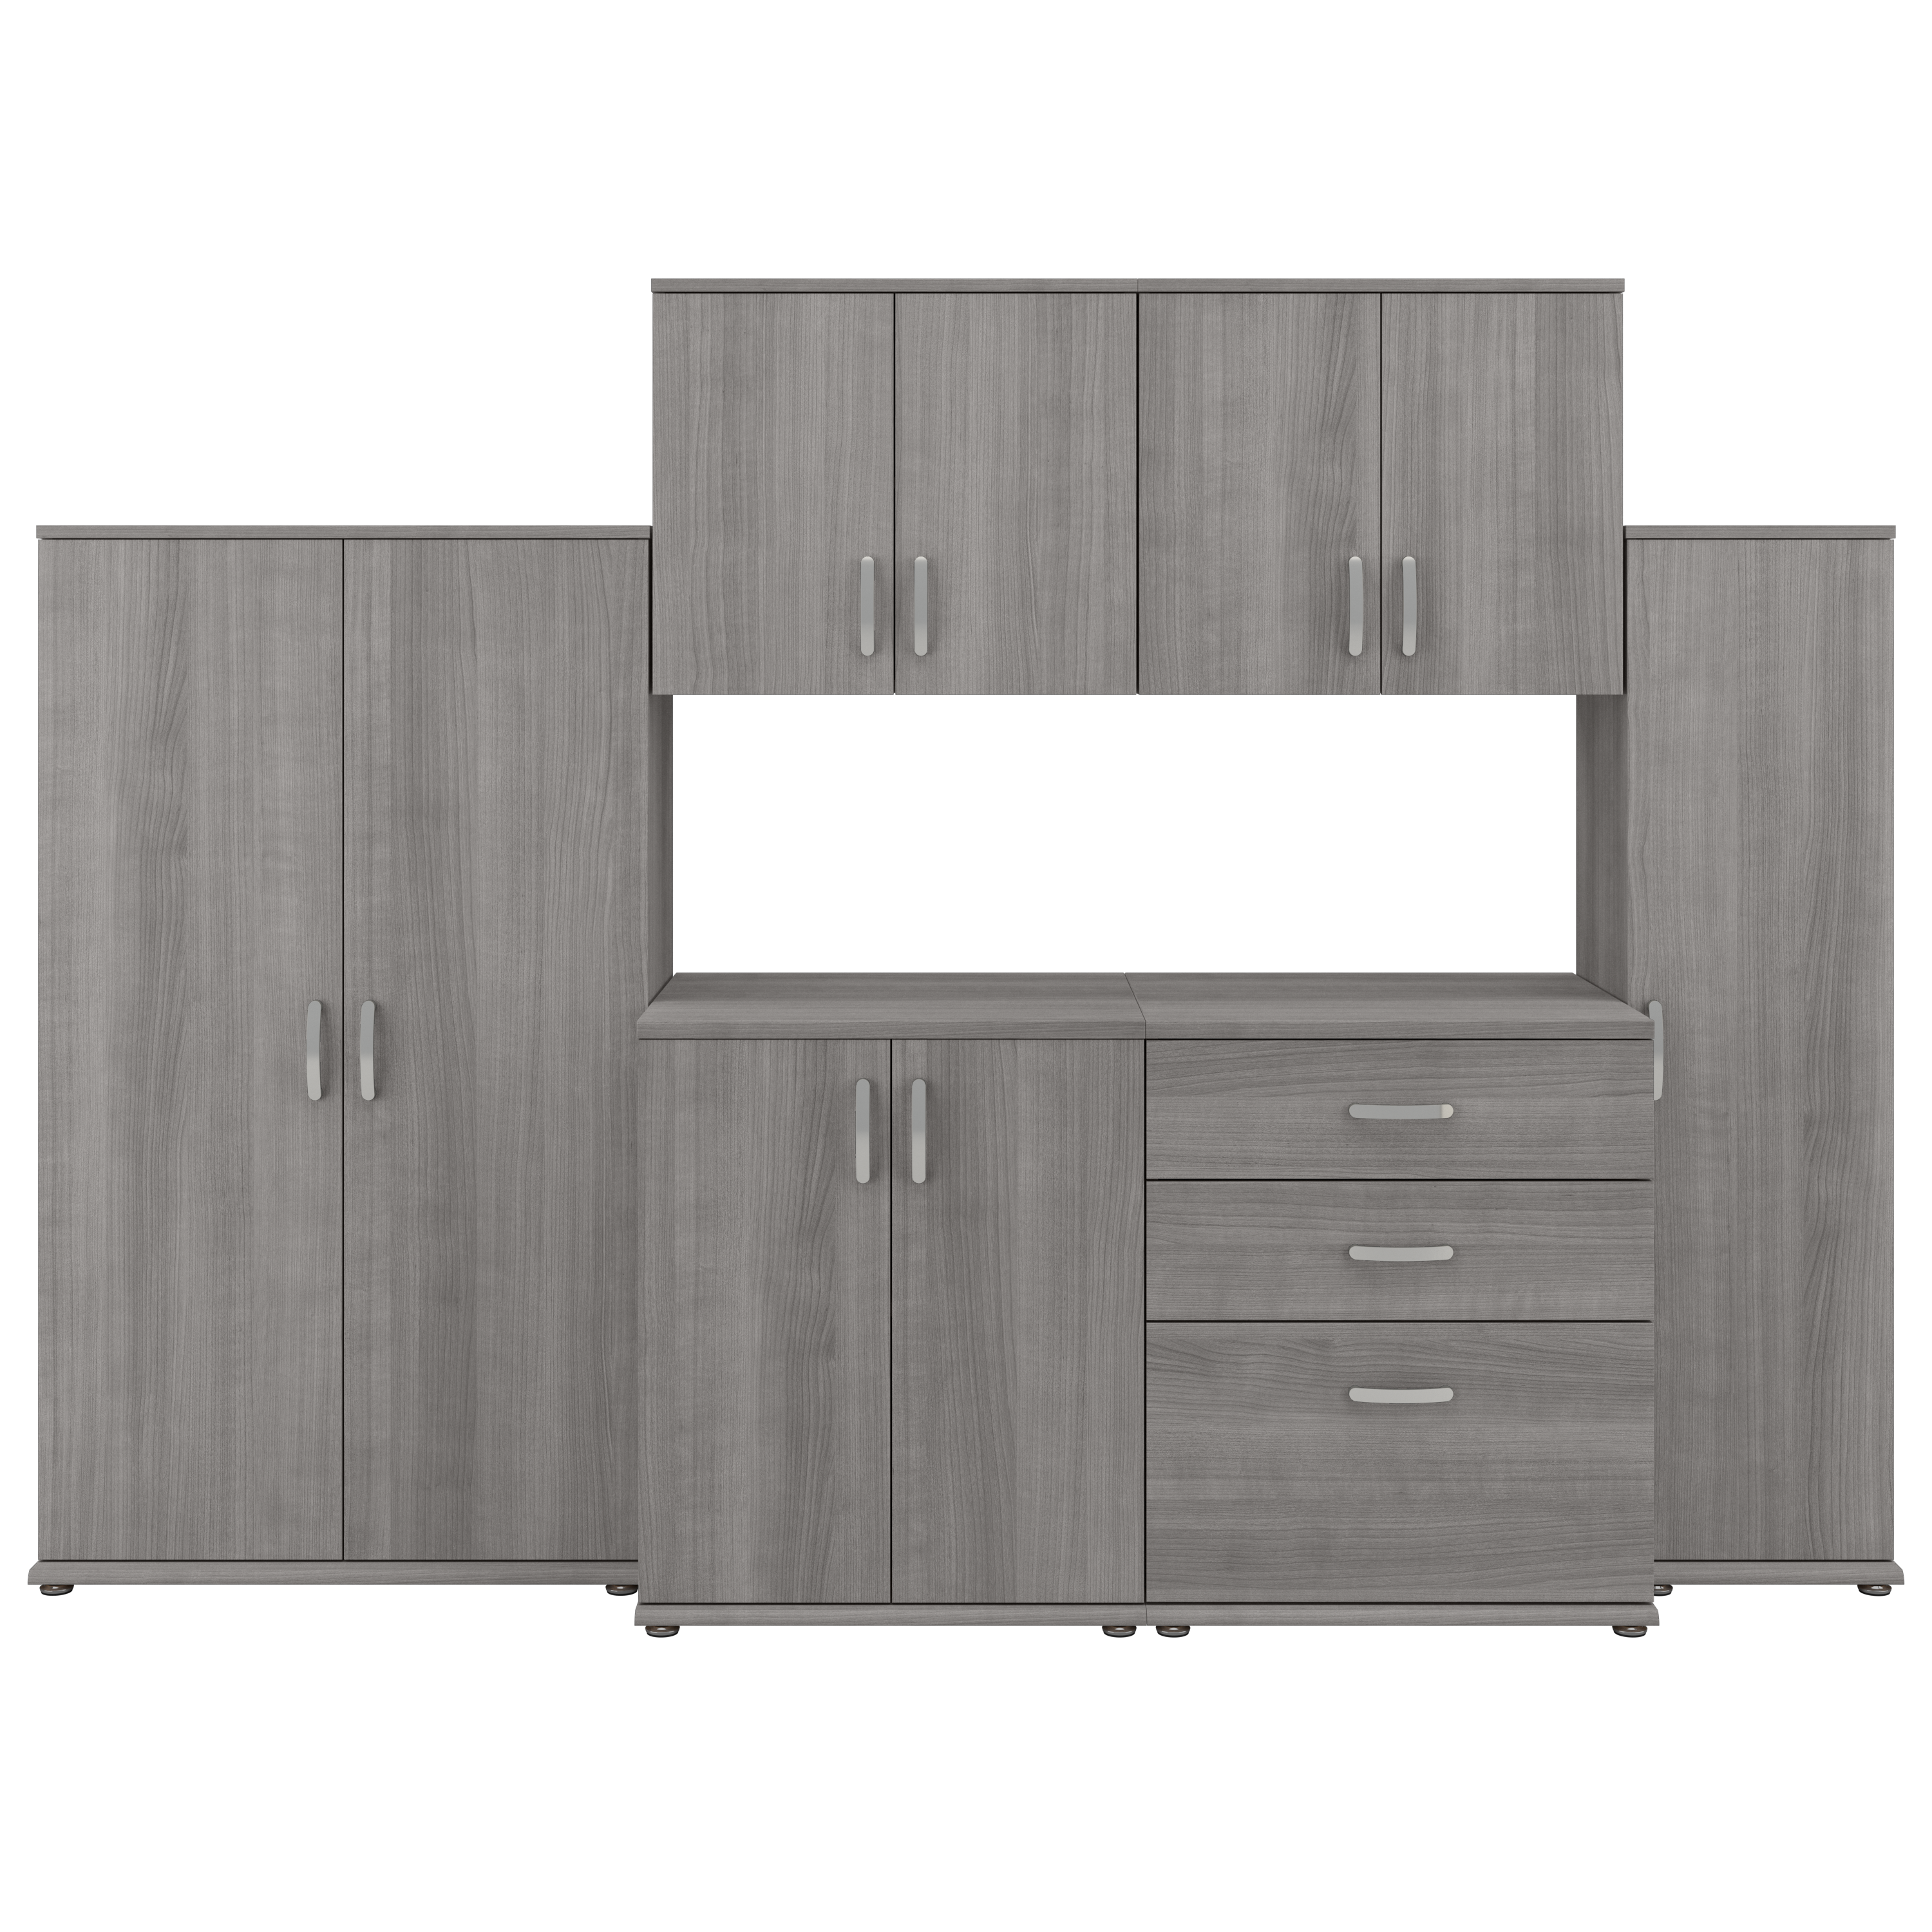 Shop Bush Business Furniture Universal 6 Piece Modular Laundry Room Storage Set with Floor and Wall Cabinets 02 LNS002PG #color_platinum gray